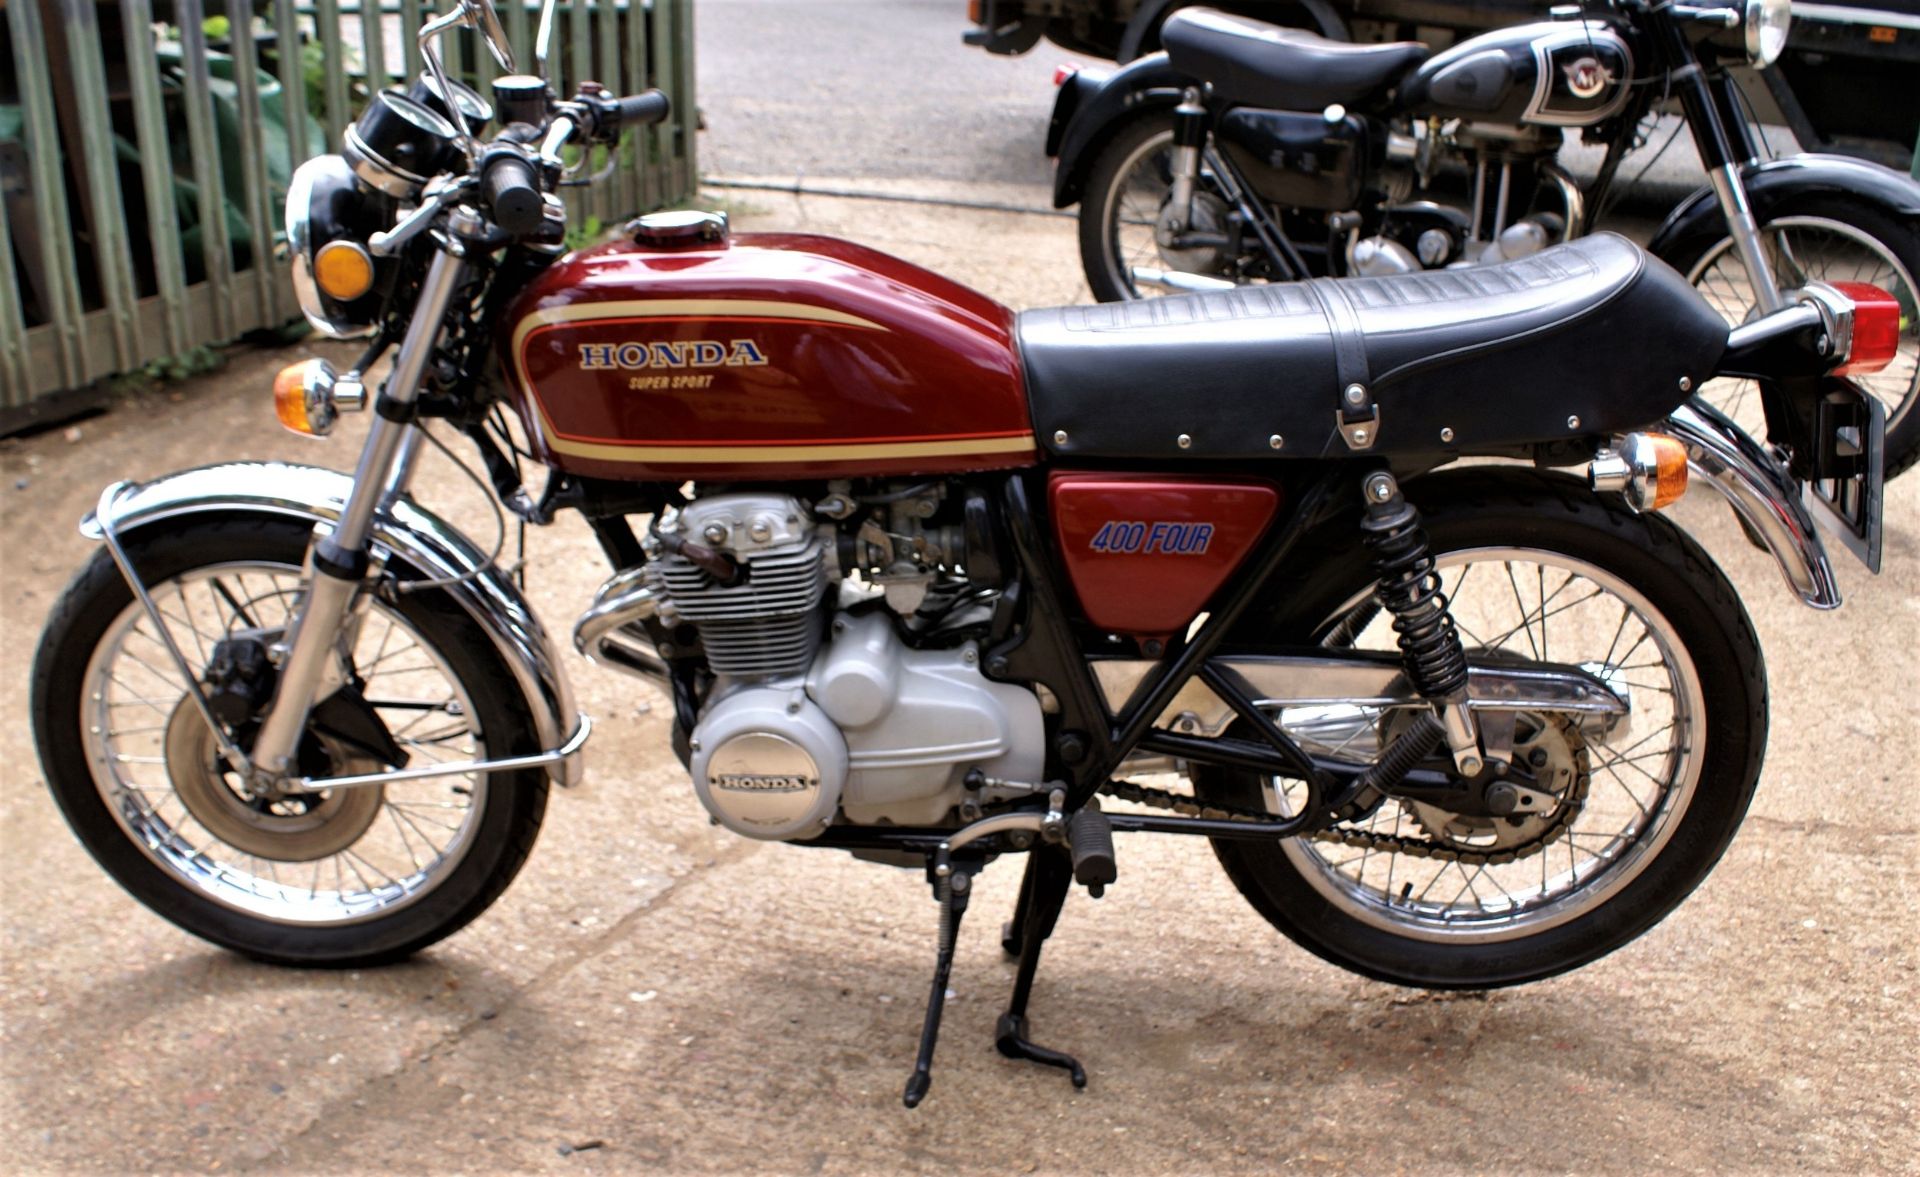 1970 HONDA 400 FOUR Registration Number: XGK 507S   Frame Number: TBA  Rightly regarded as one of - Image 2 of 5